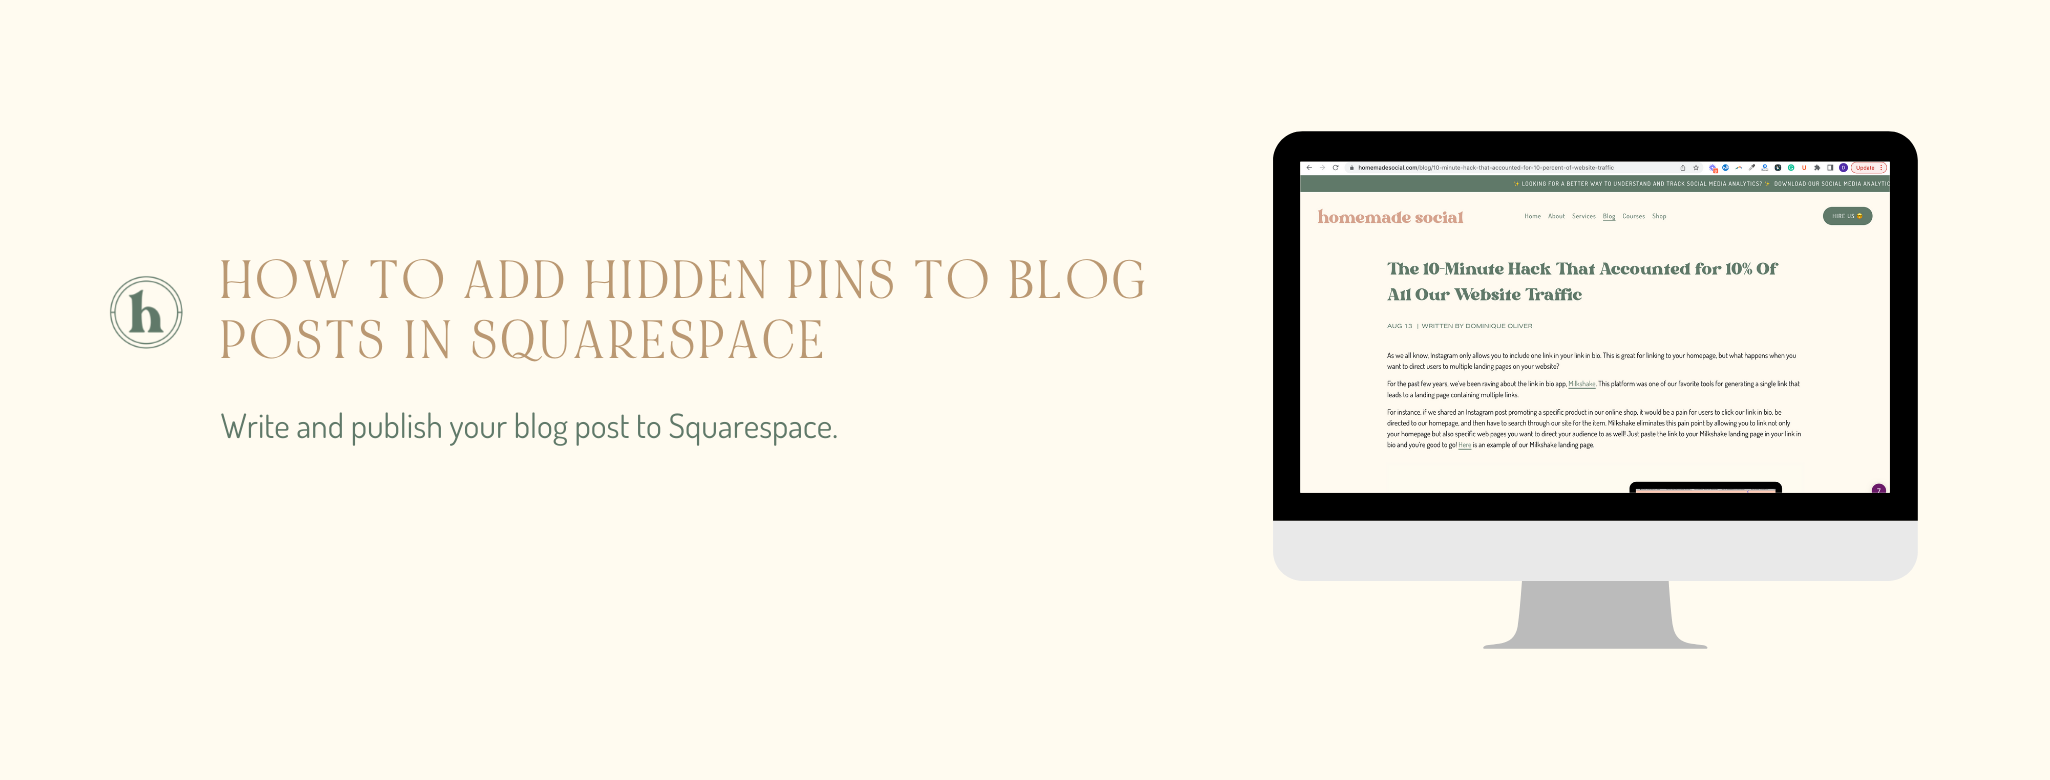 How to Add Hidden Pins to Blog Posts in Squarespace — Homemade Social